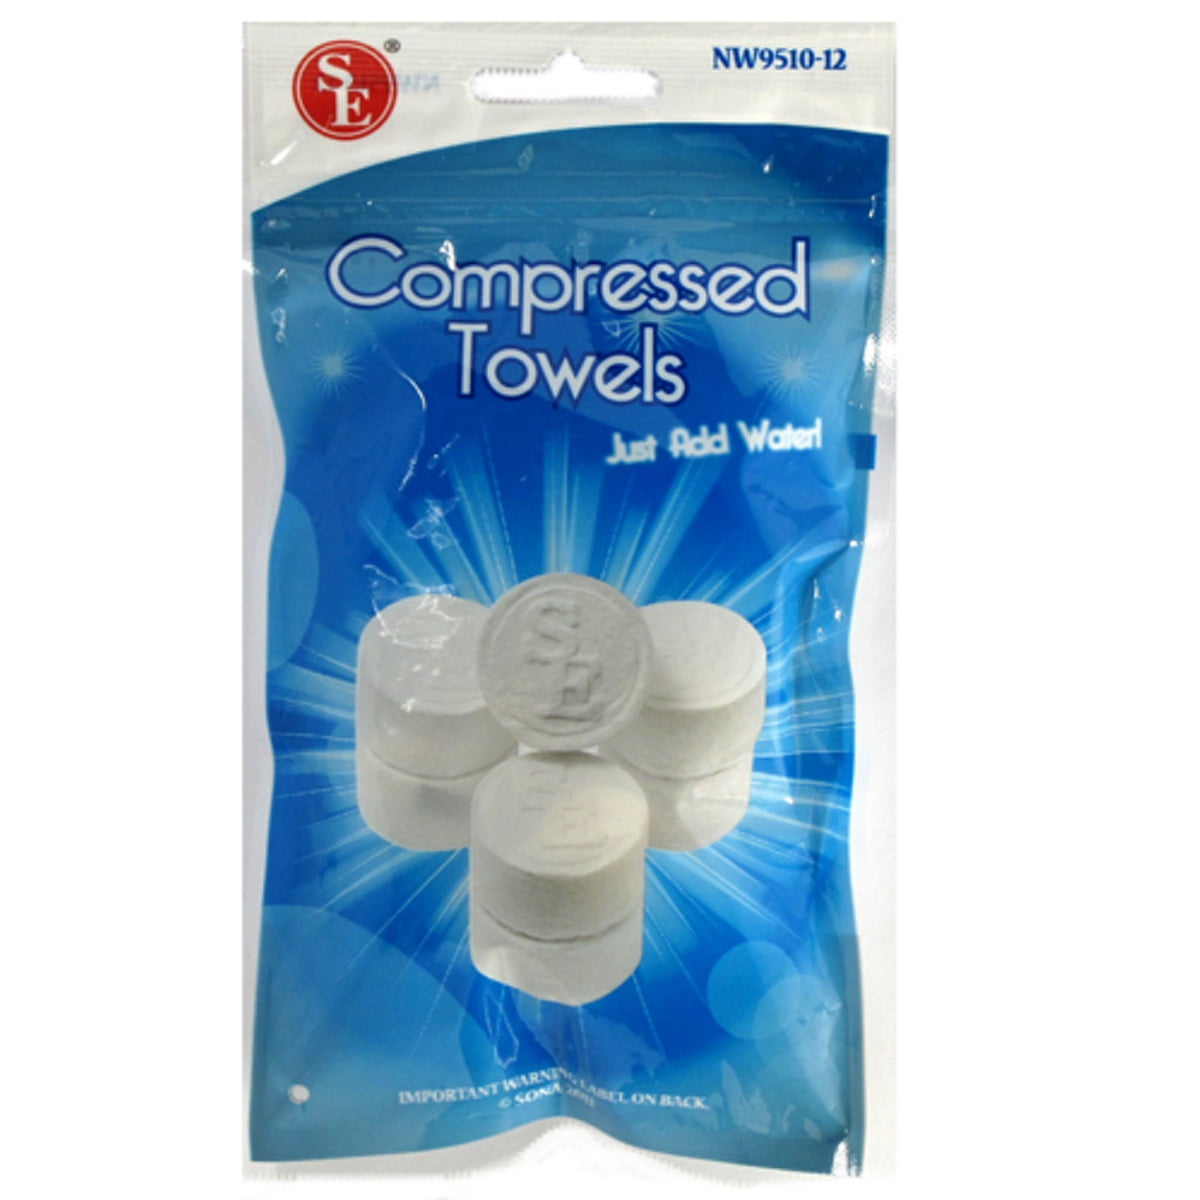 COMPRESSED TOWELS 4 PACK TOP CAMP EXPANDING TEA TOWEL CLOTH CAMPING HIKING 